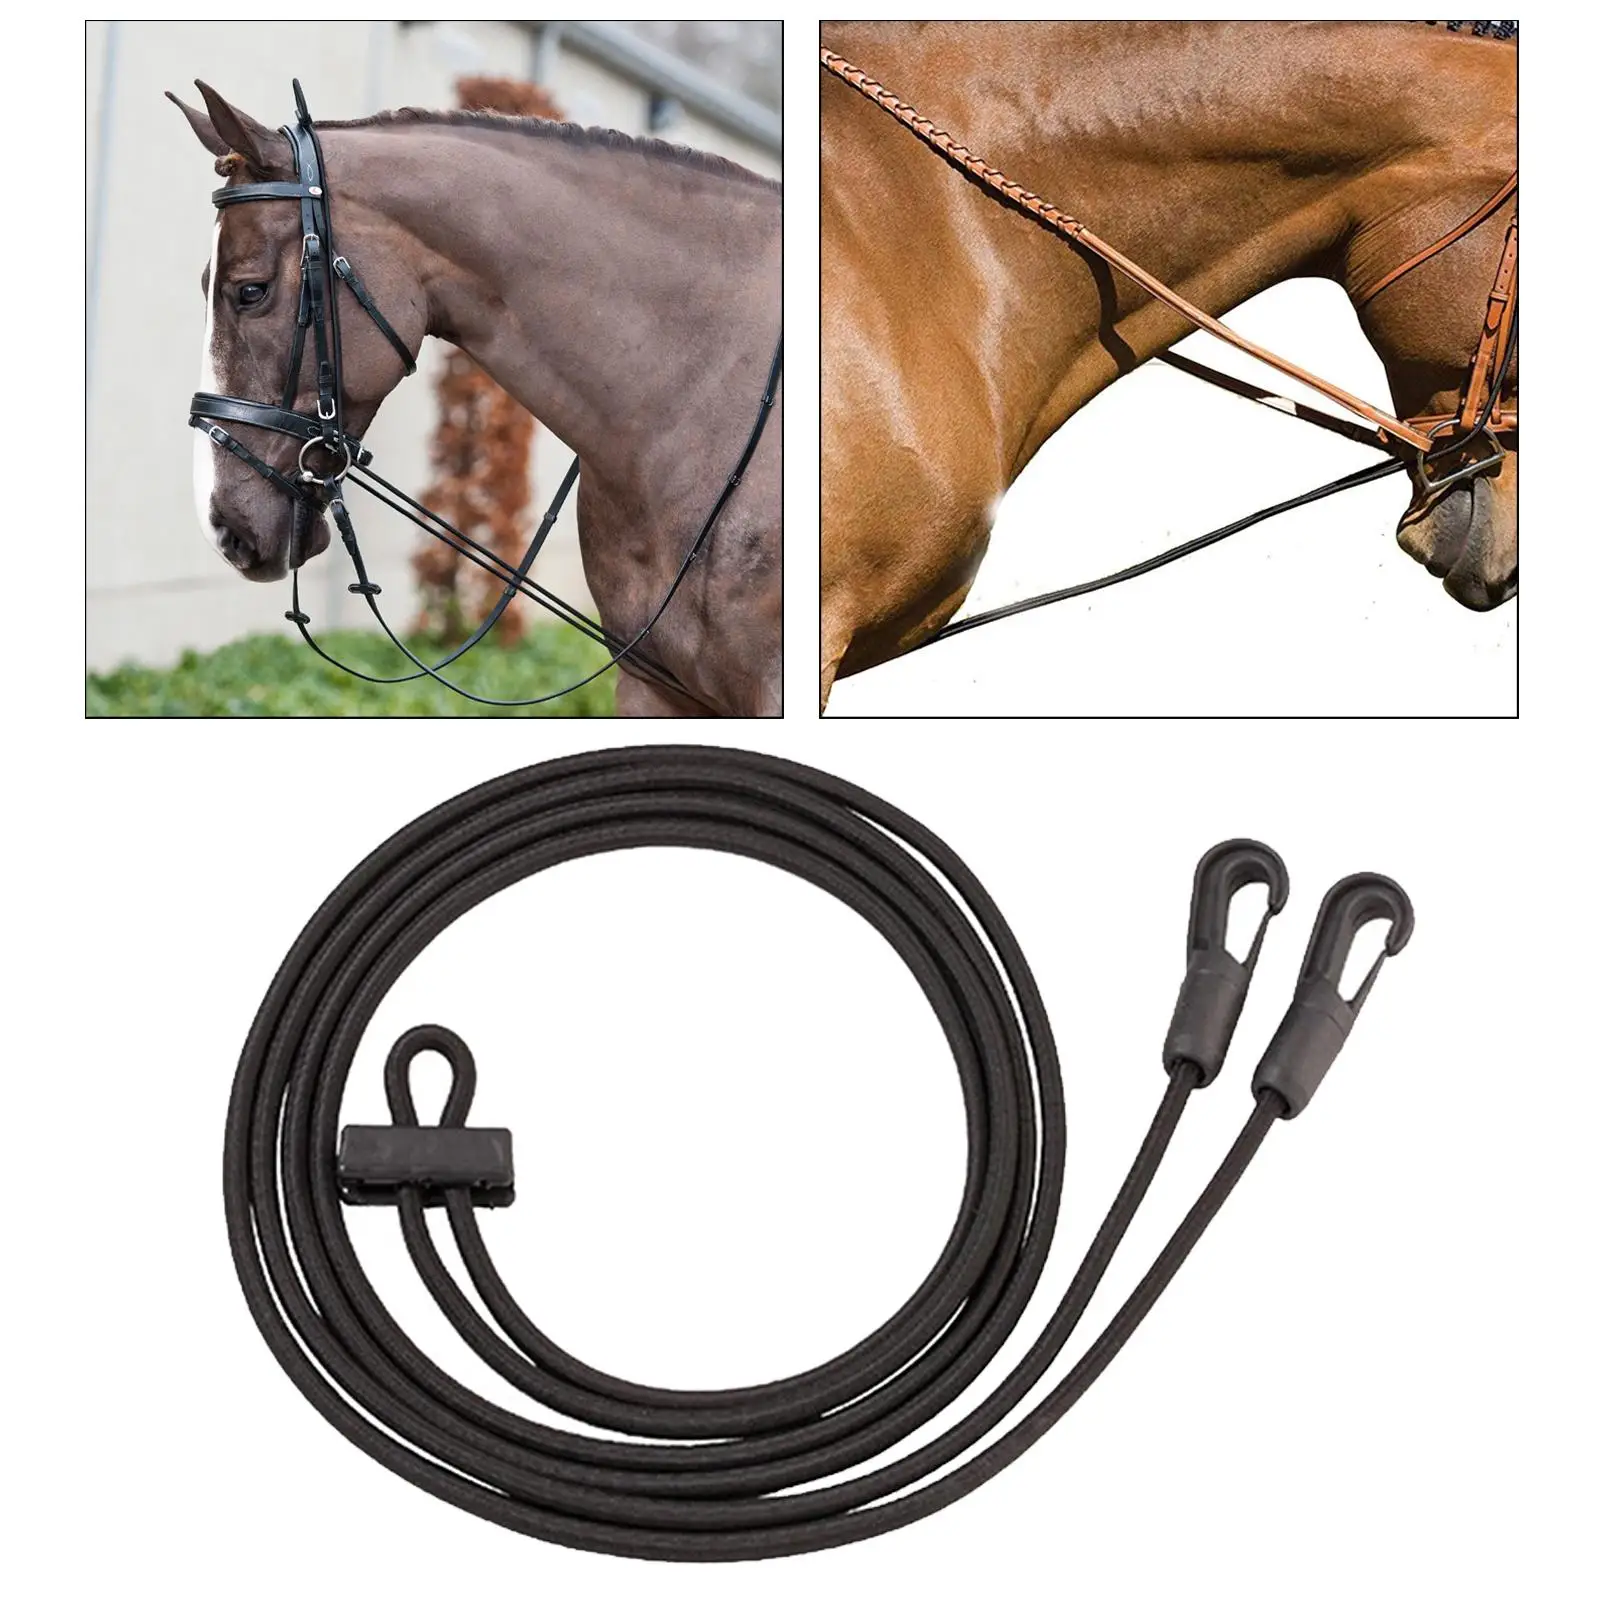 Horse Reins Pulling Training Rope Wear Resistant Leading Headcollar for Horses Harness Outdoor Sports Care Grooming Racecourse